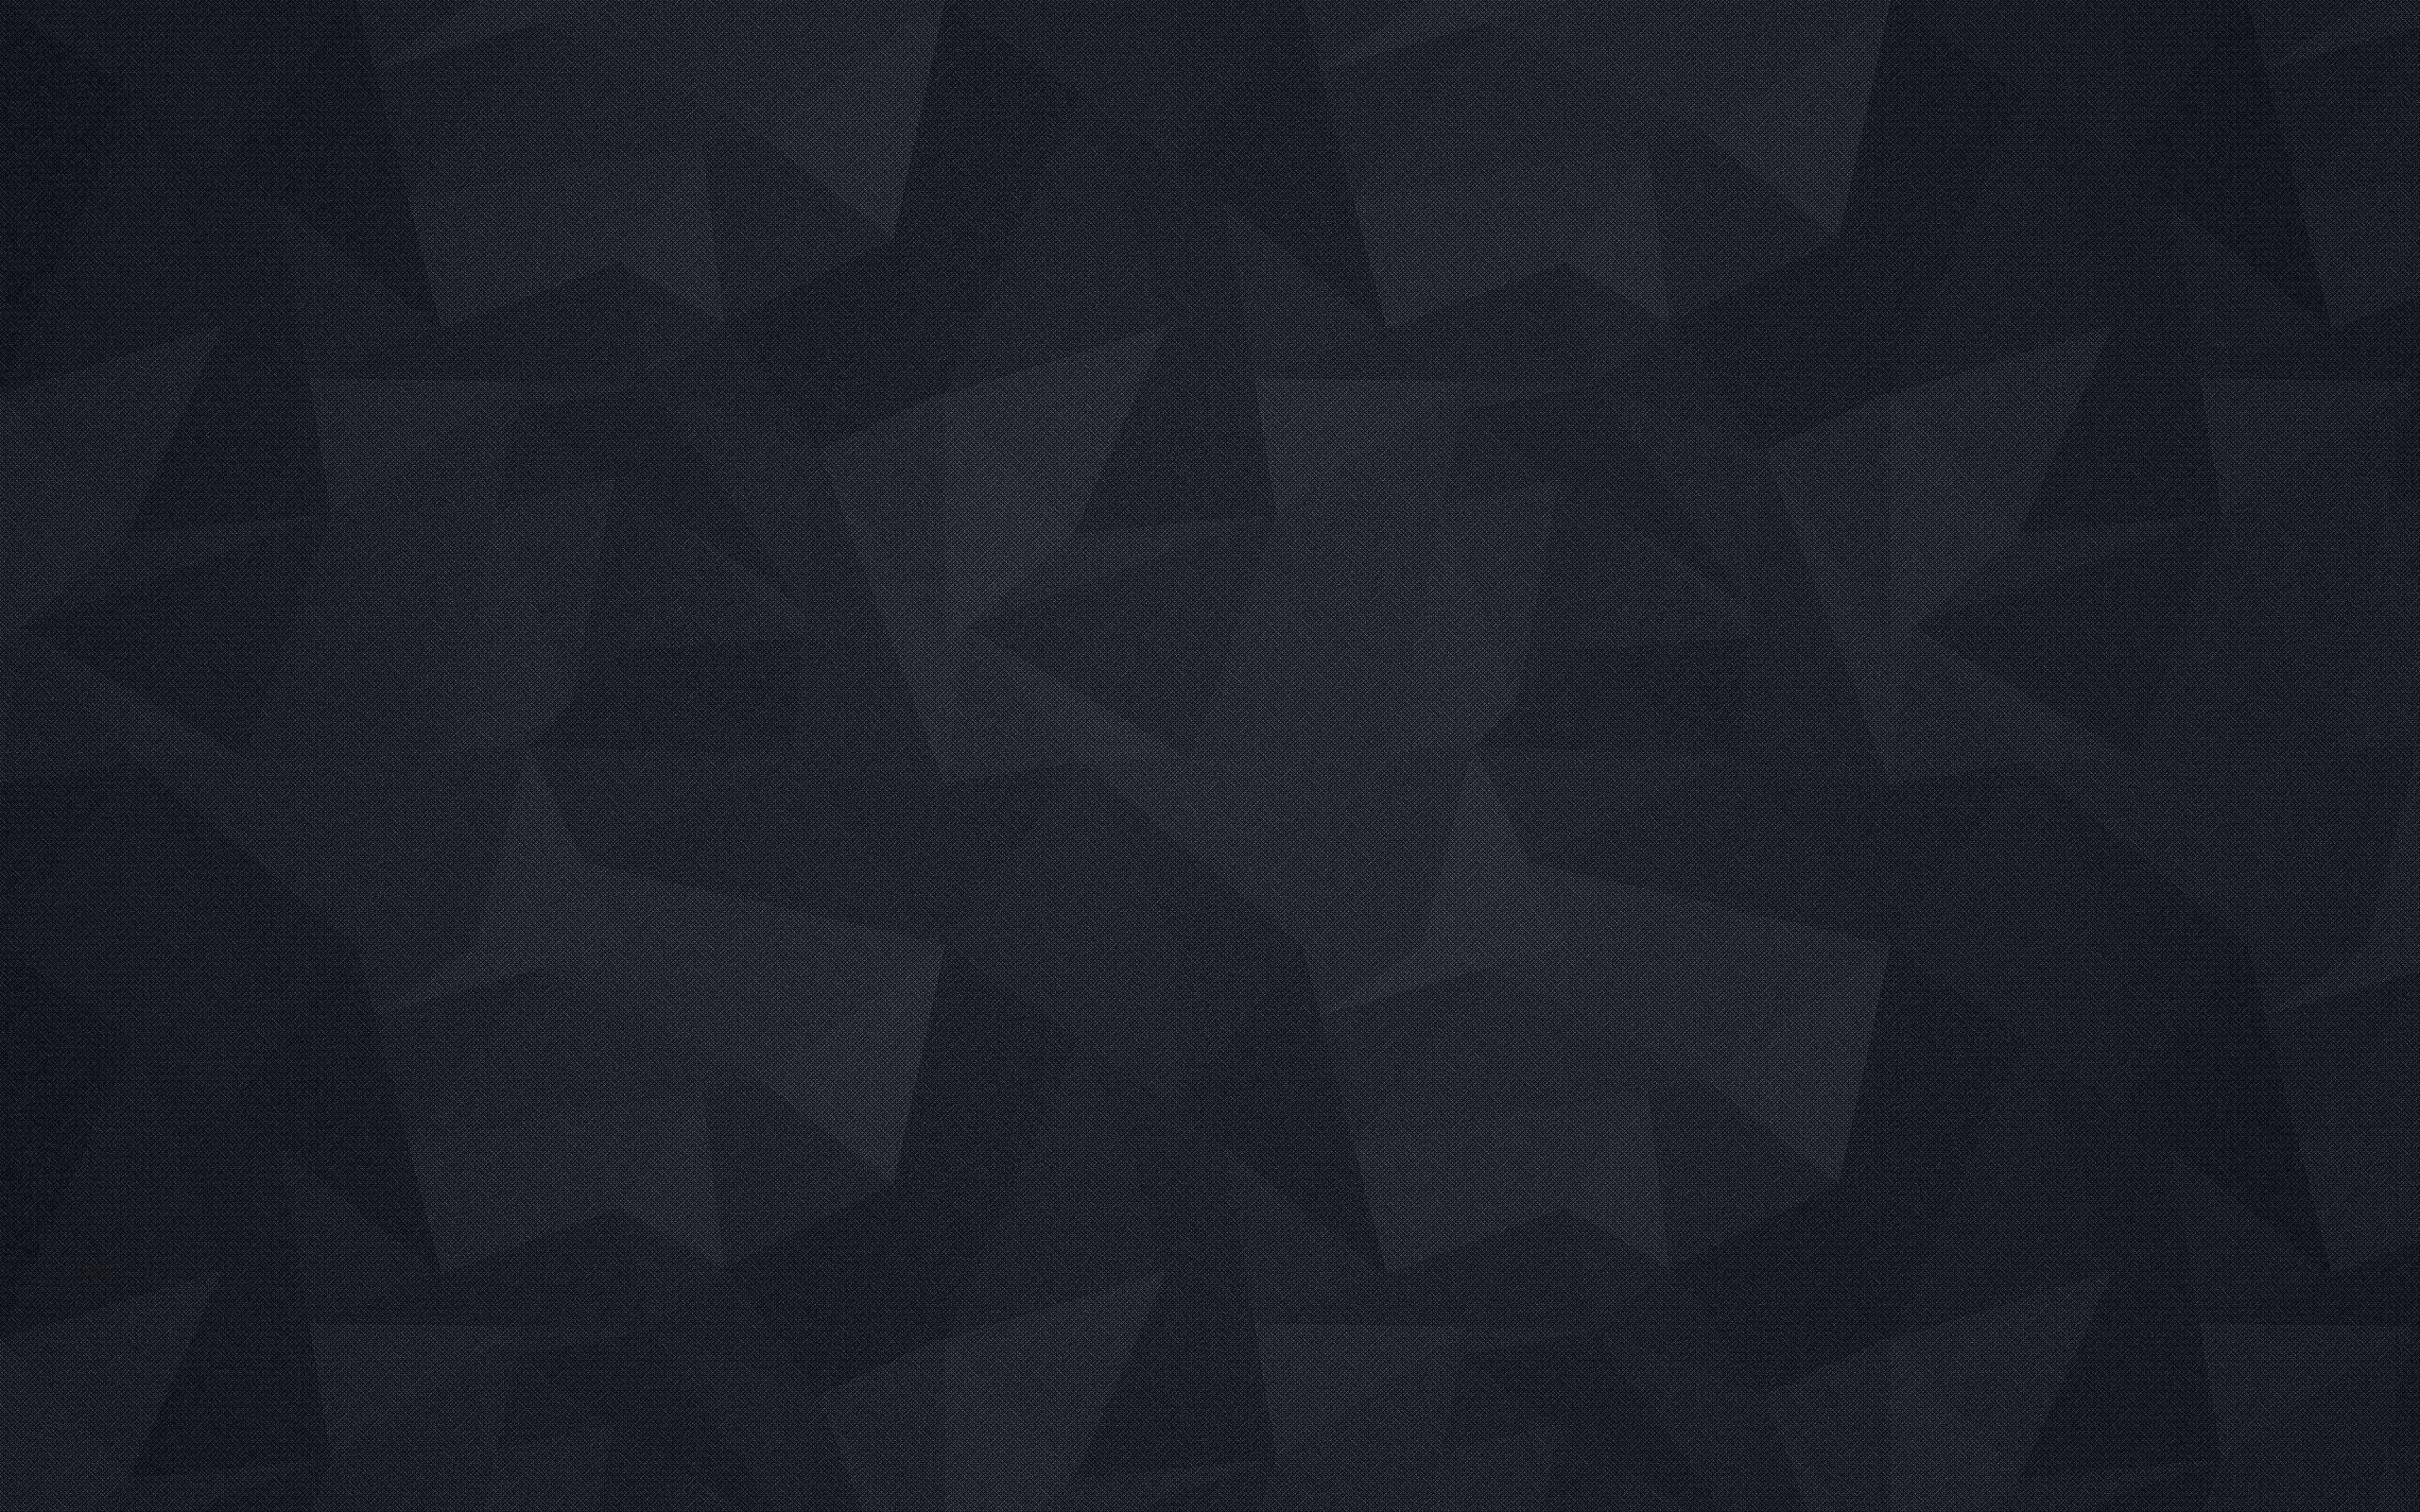 black and gray wallpaper, minimalism, backgrounds, pattern, abstract